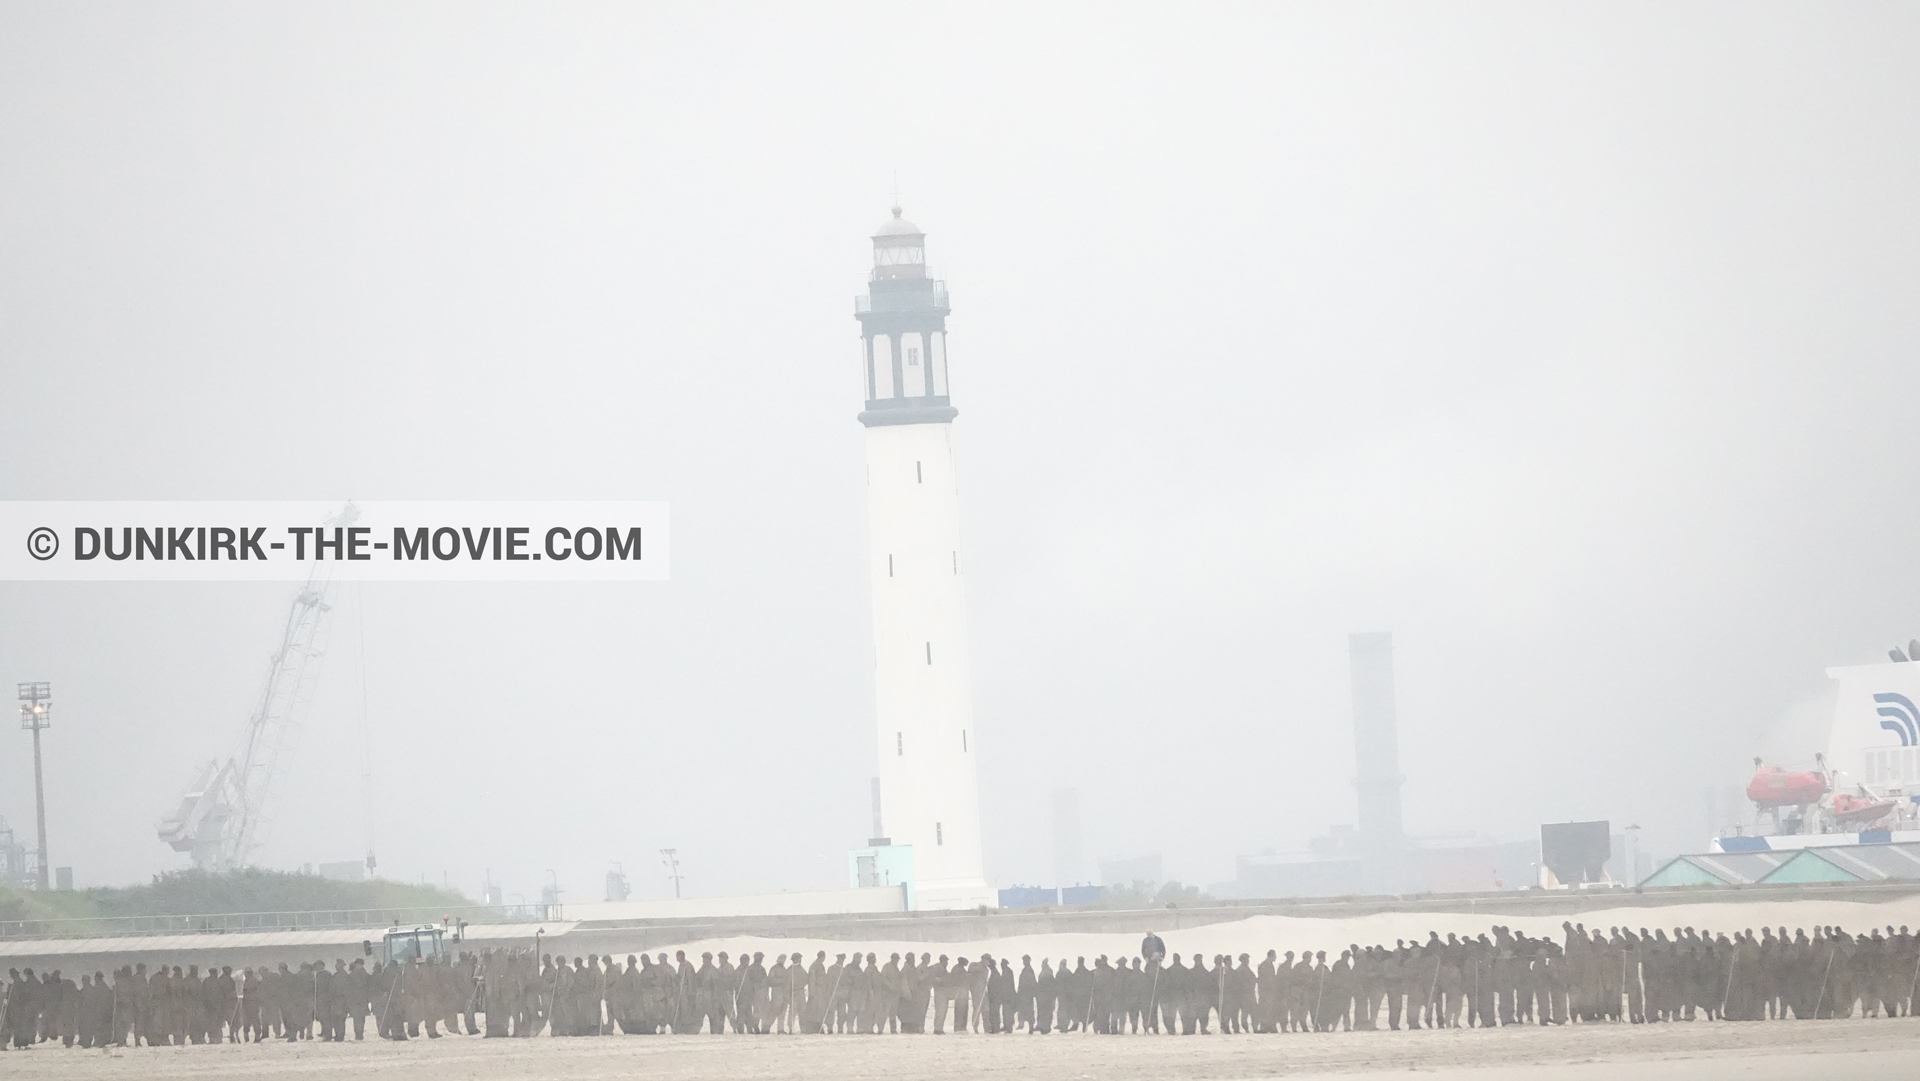 Picture with decor, white smoke, Dunkirk lighthouse,  from behind the scene of the Dunkirk movie by Nolan